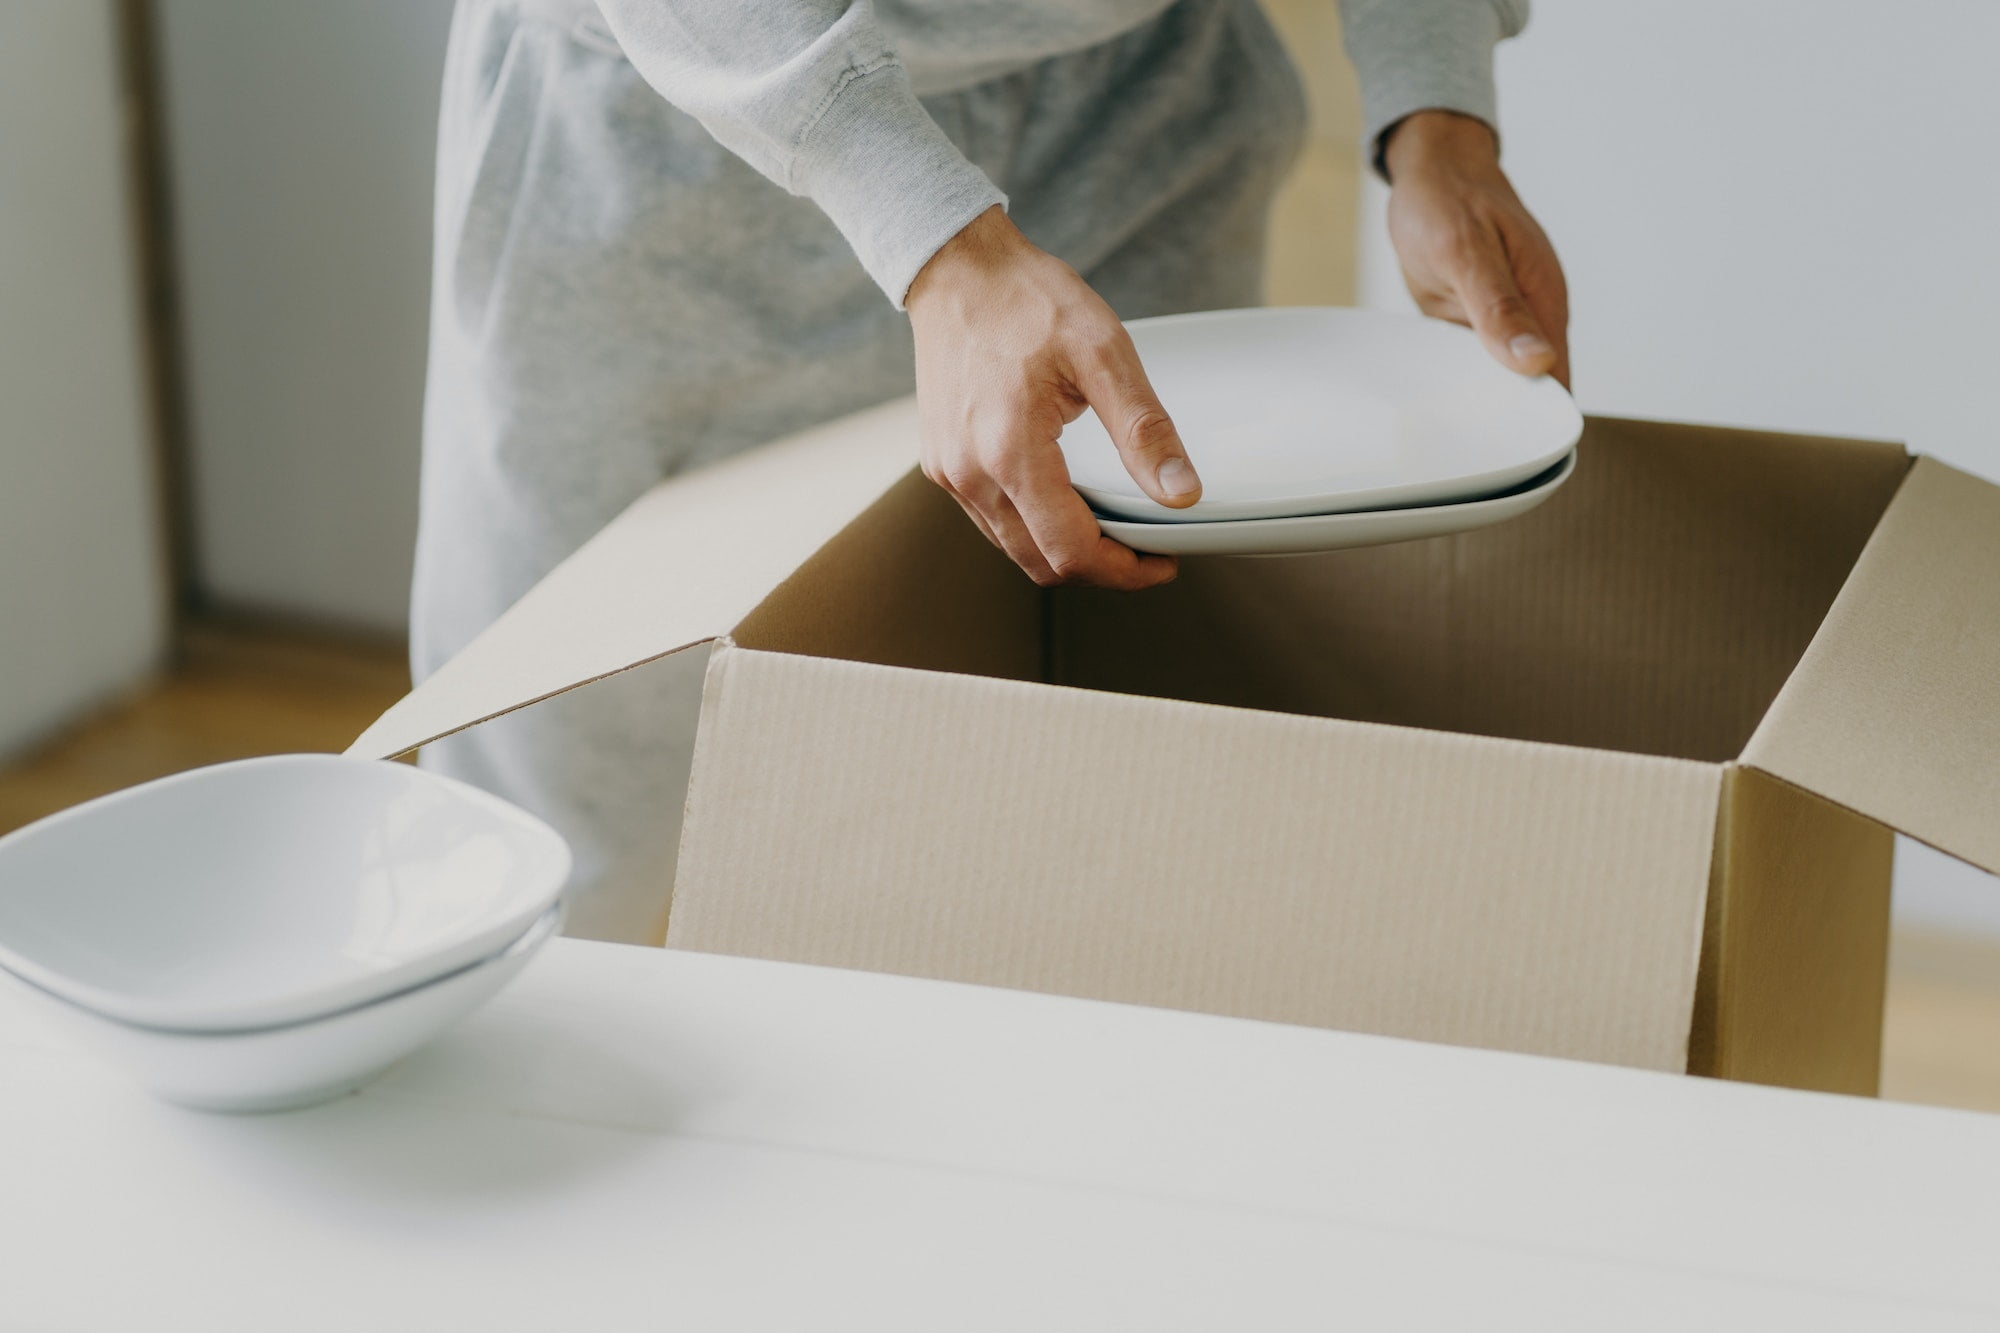 A woman is opening a cardboard box with a plate inside.